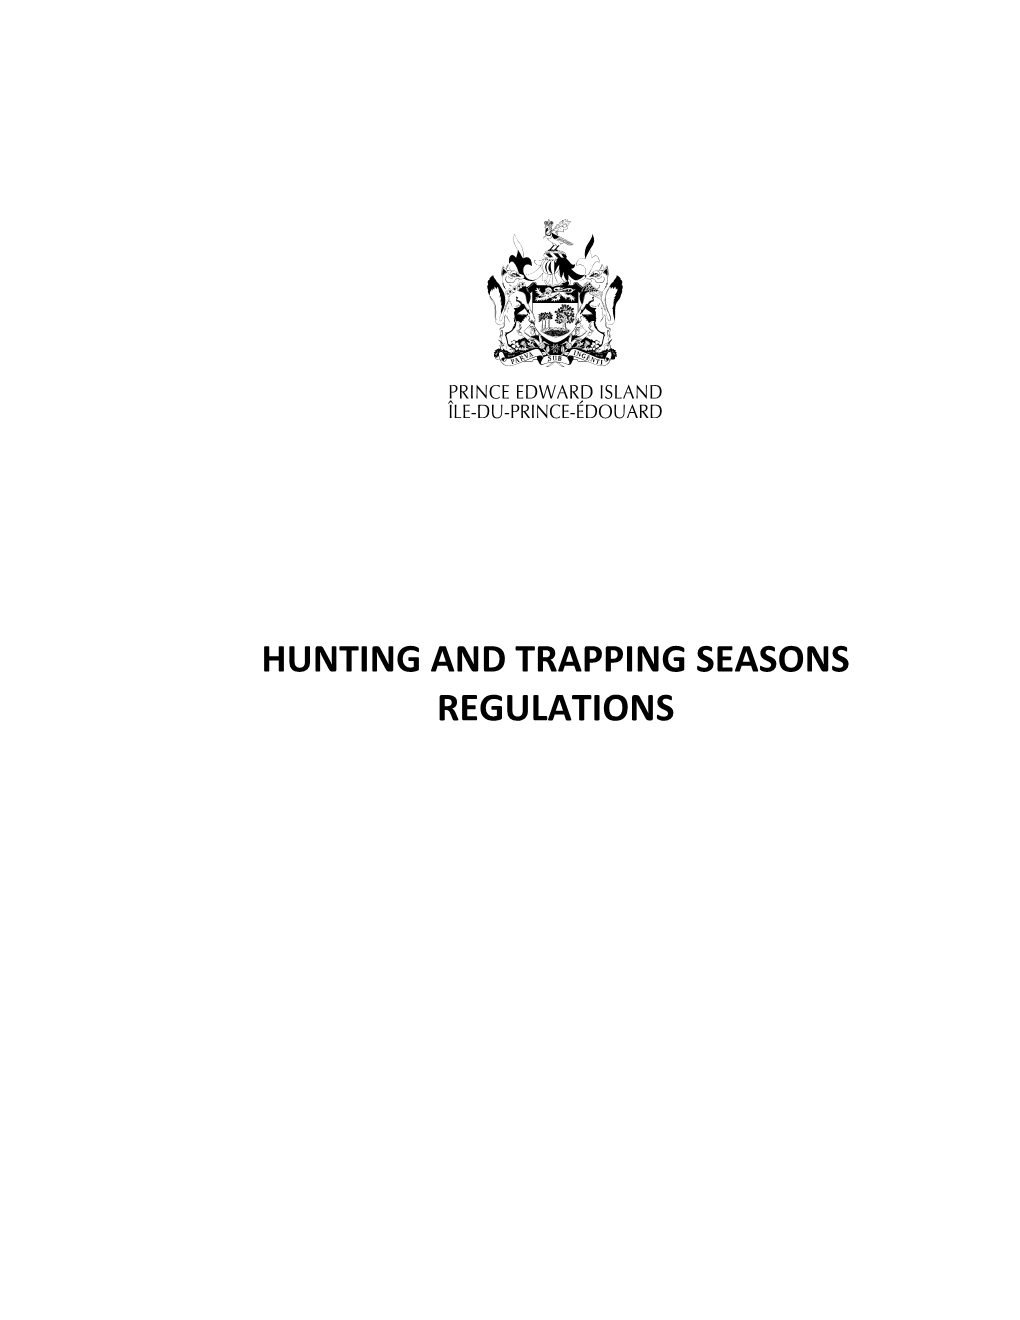 Hunting and Trapping Seasons Regulations